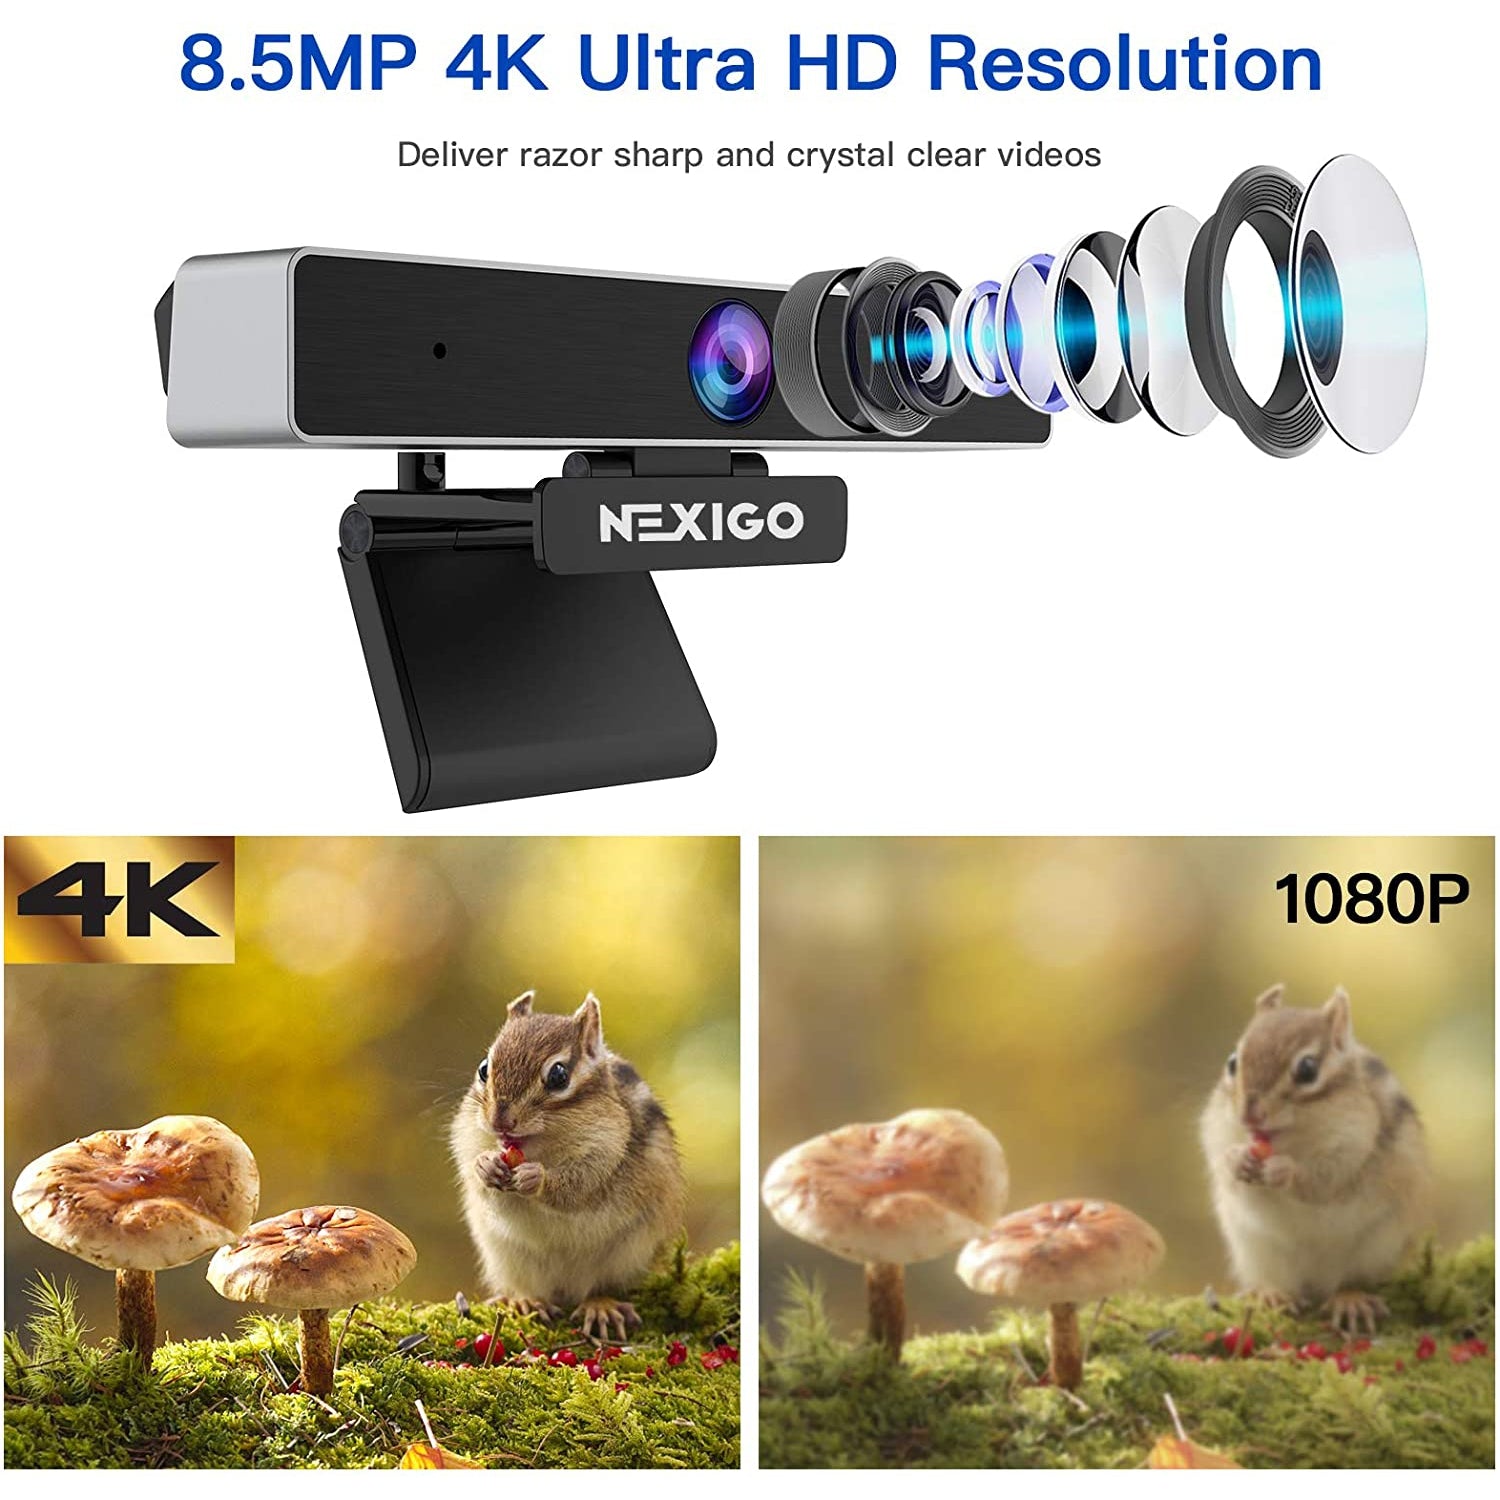 Compared to other 1080p webcams, NexiGo 4K 8.5MP delivers razor-sharp and crystal-clear videos.